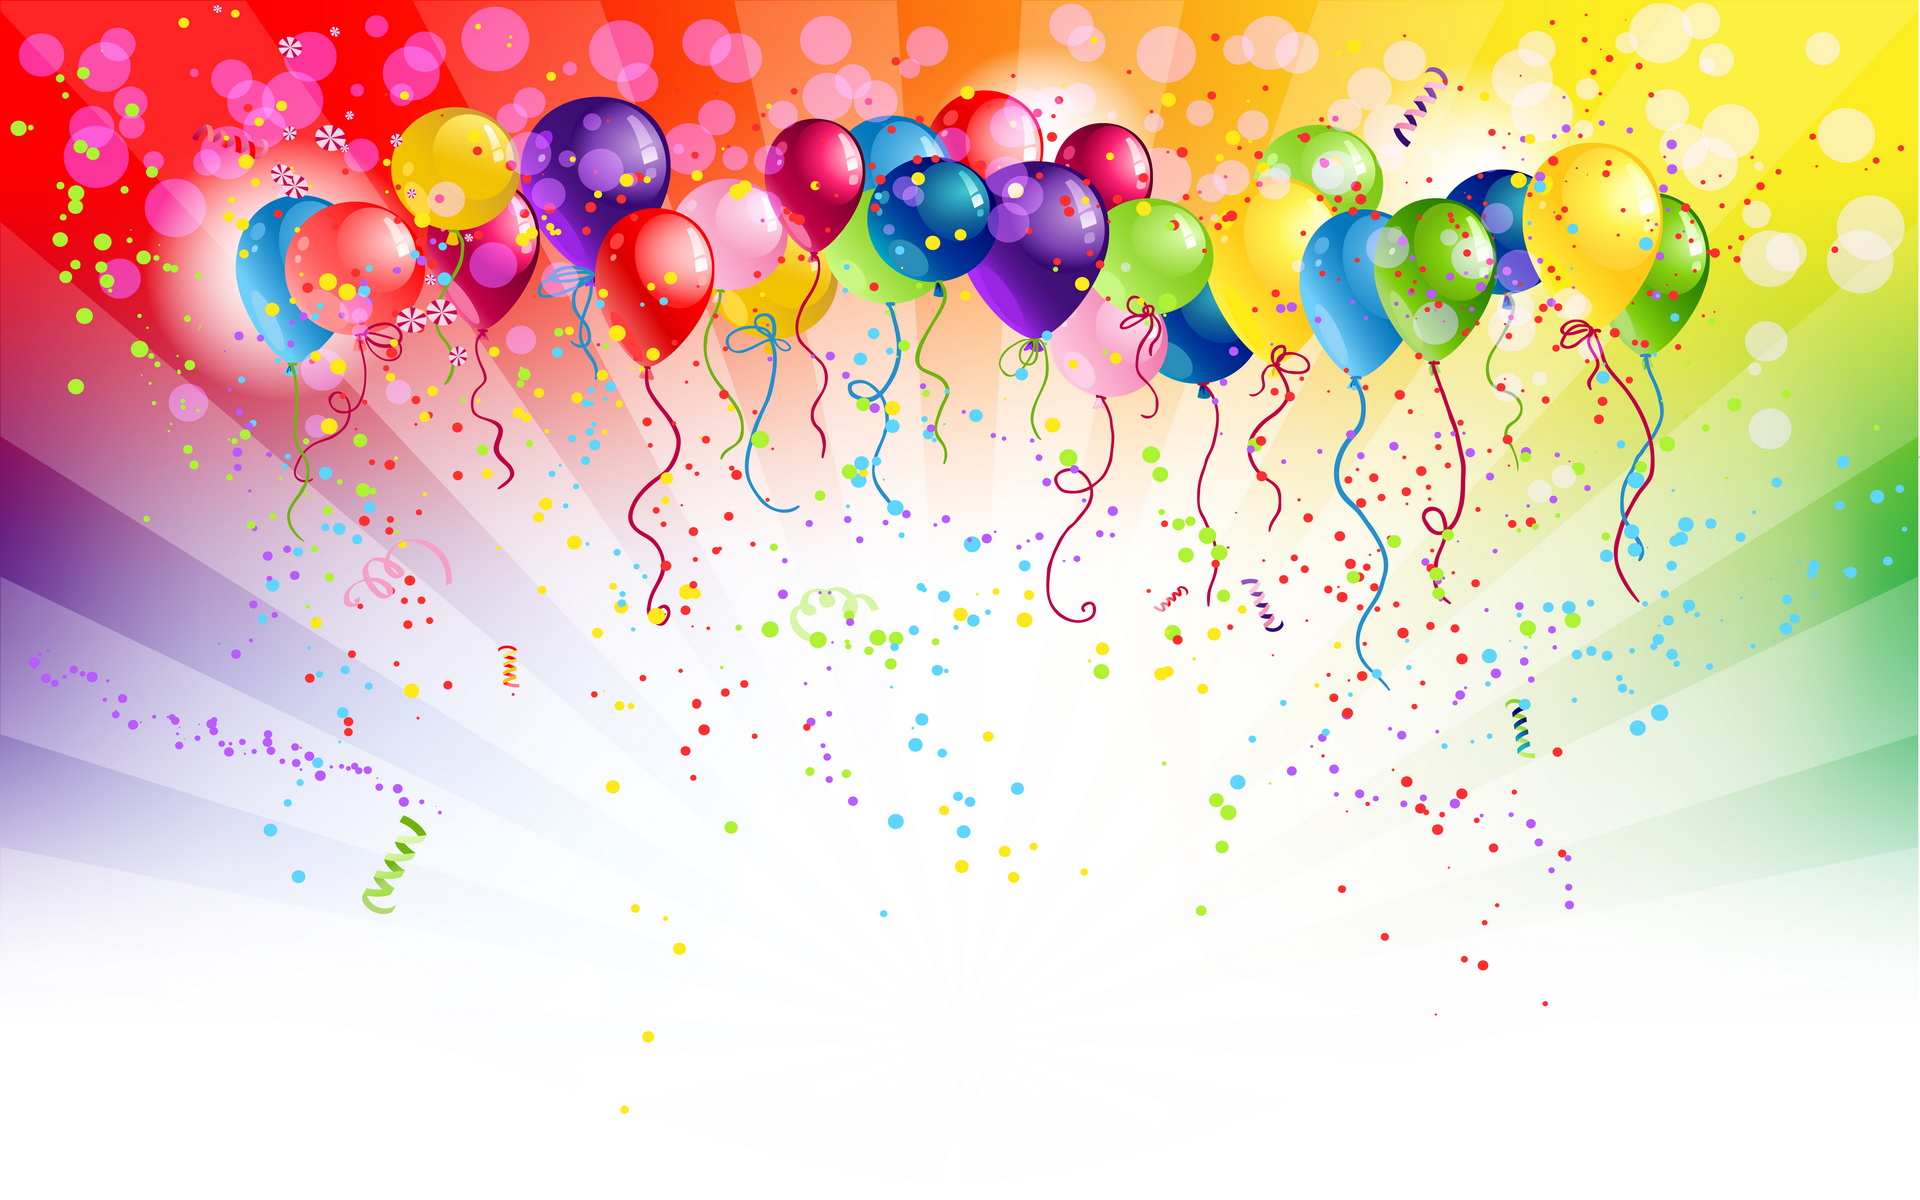  20 2015 By Stephen Comments Off on Birthday Balloons HD Wallpaper